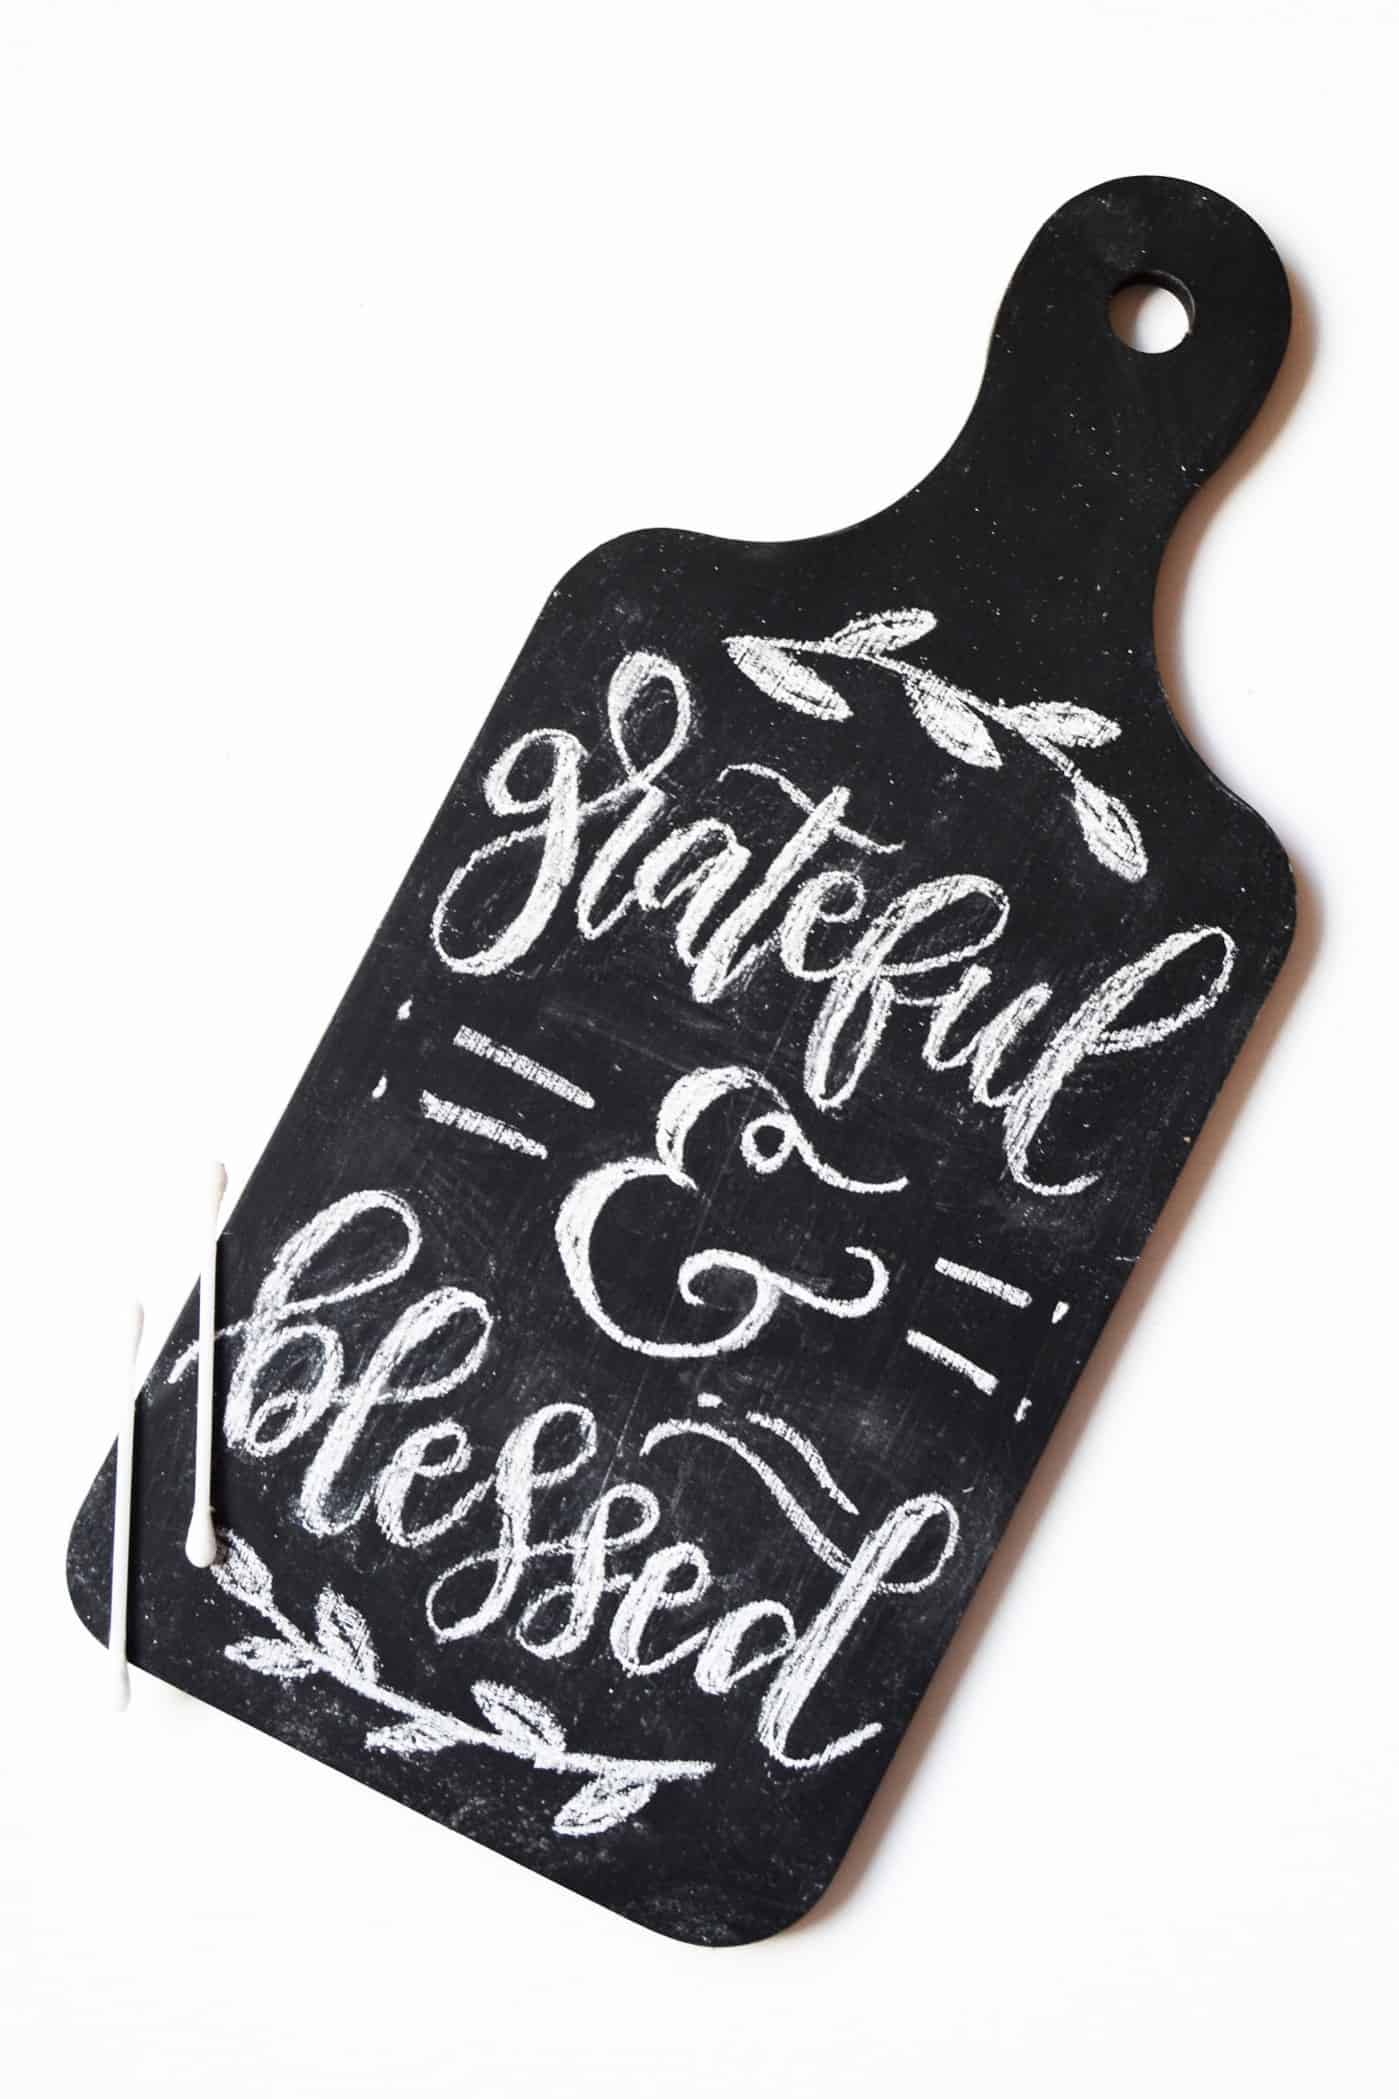 Cutting board painted with chalkboard paint